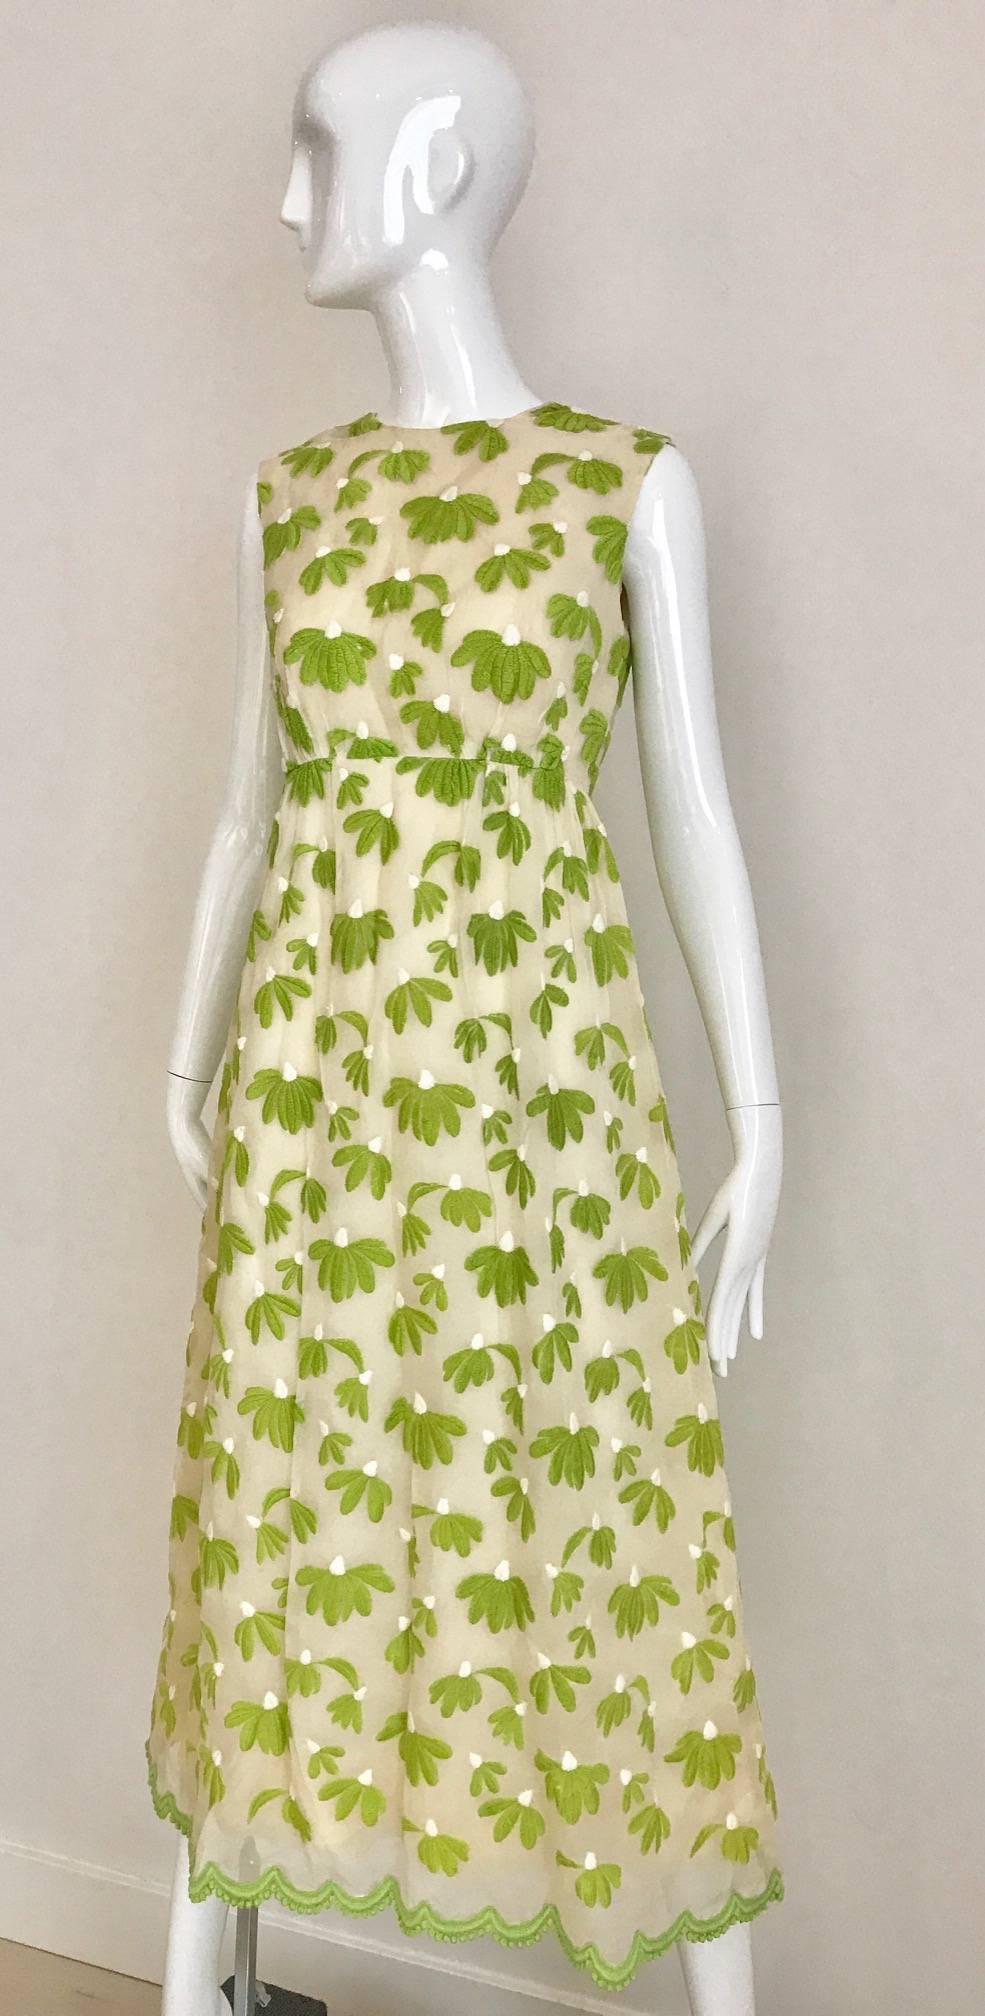 Vintage 1960s Bob Bugnand creme and green leaf sleeveless heath Dress. Zip at the back. Dress is fully lined.
Size: SMALL 2-4
Bust: 32 inch  / Waist: 26 inch  / Hip: 40 inch ( lining) outer fabric is 46 inch
Dress length: 48 inch

***Small tear